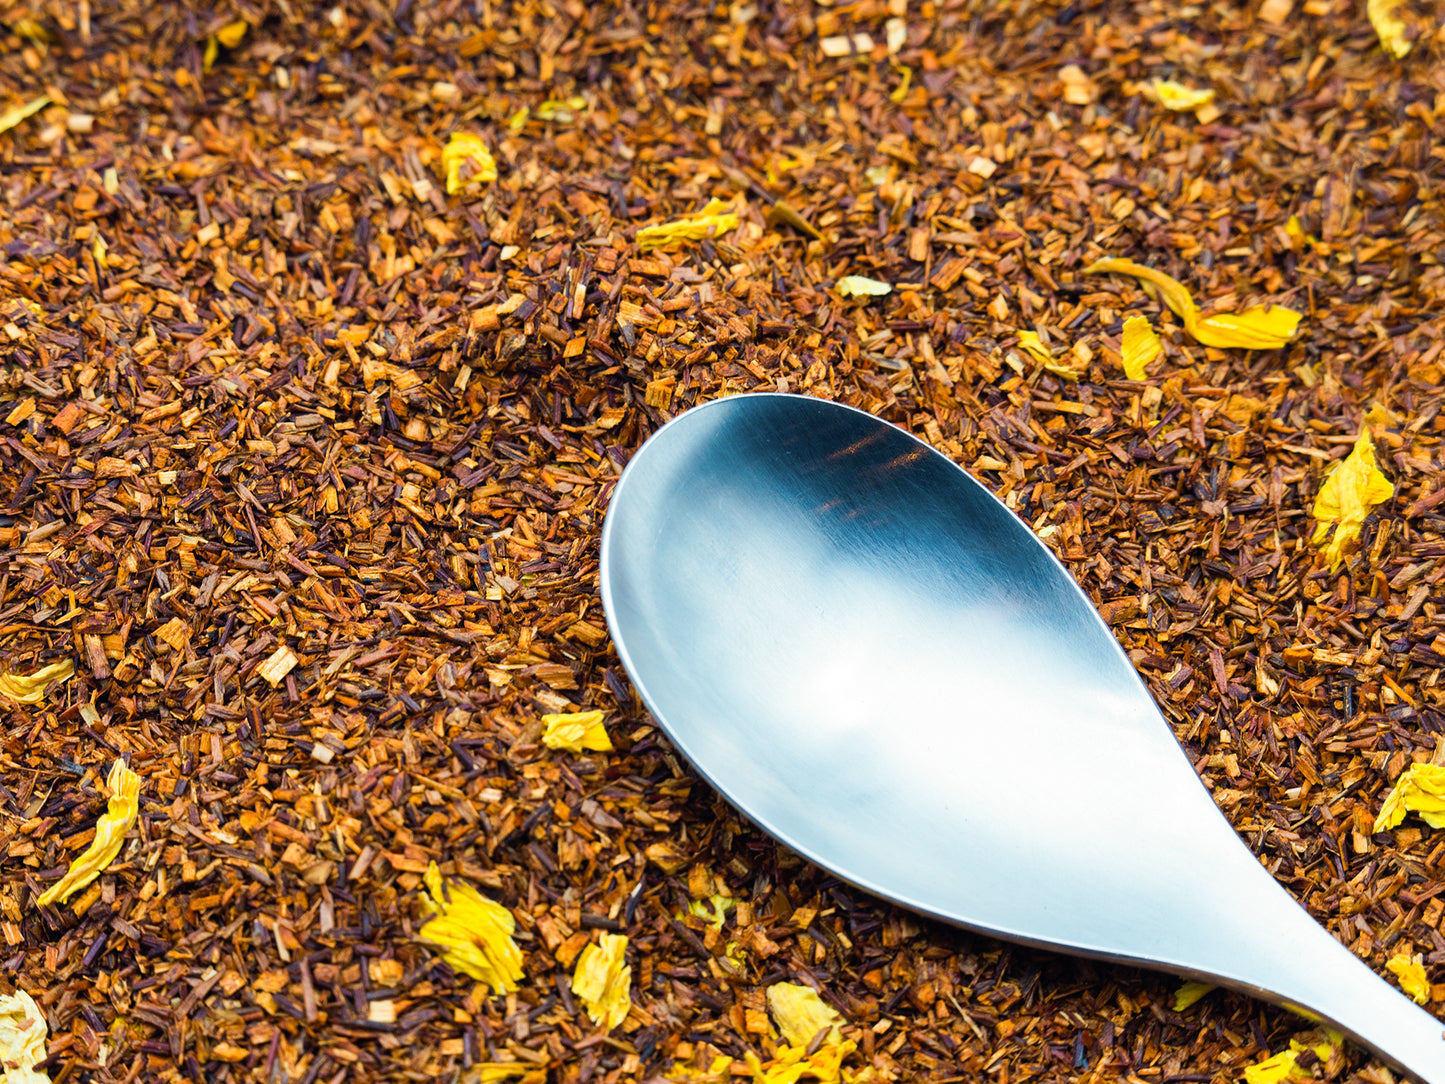 Loose Rooibos tea from TEA23 with a spoon resting on top